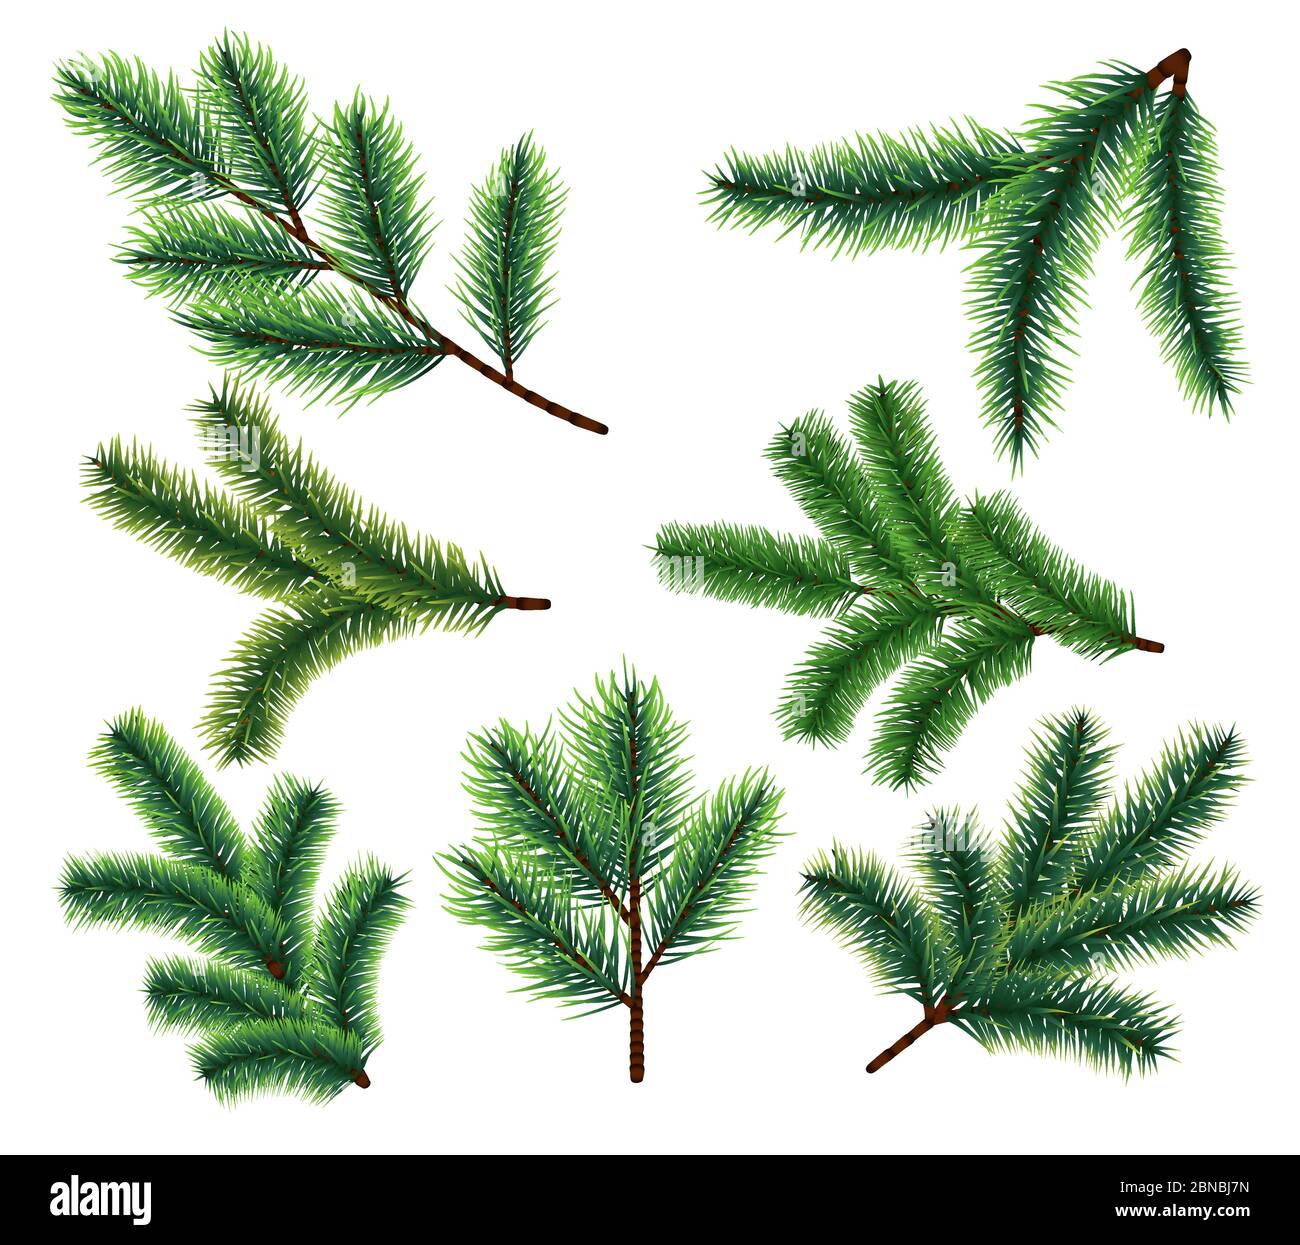 Pine tree branches. Christmas fir tree branch. Vector xmas decorarion elements. Illustration of pine tree, fir evergreen branch Stock Vector